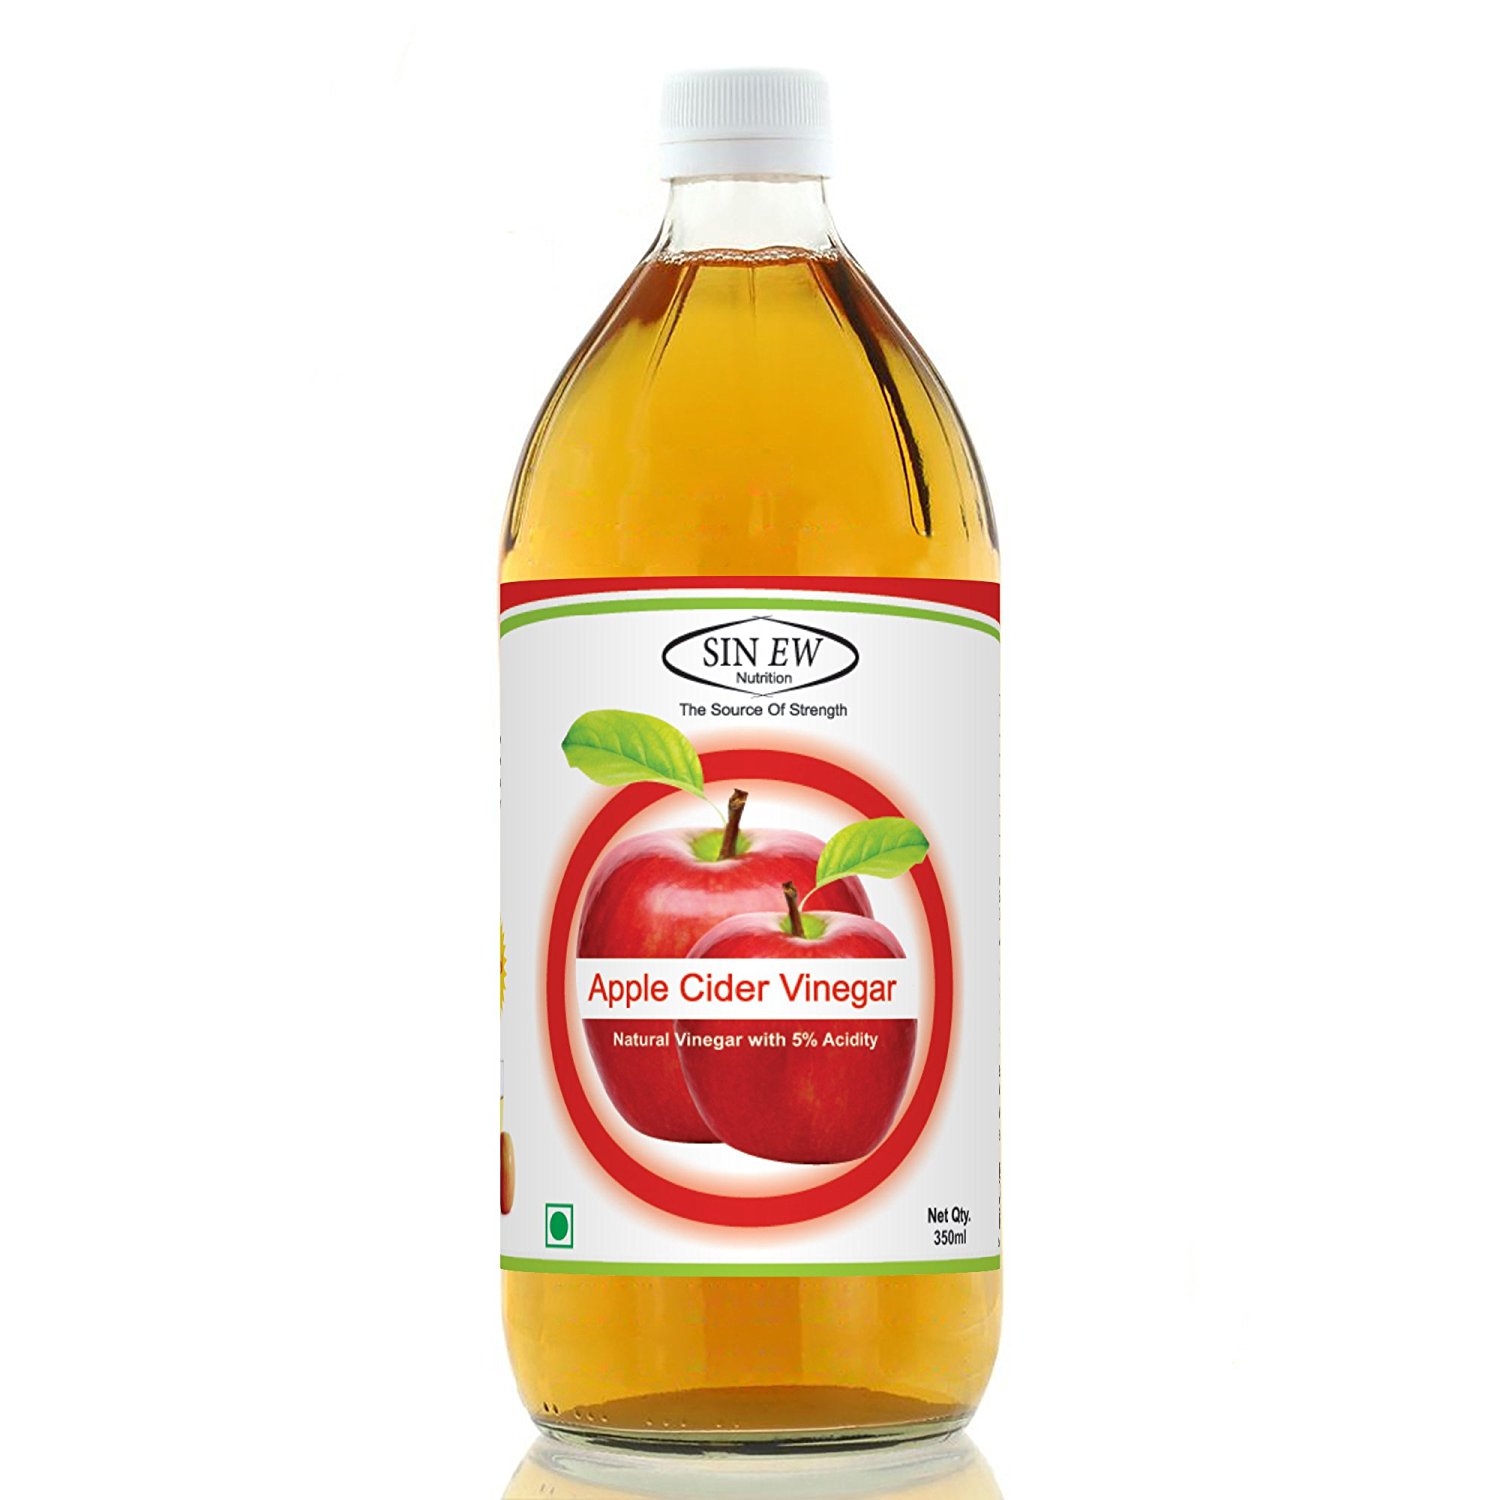 Amazon: Sinew Nutrition Apple Cider Vinegar, 350ml at Rs 99 Only